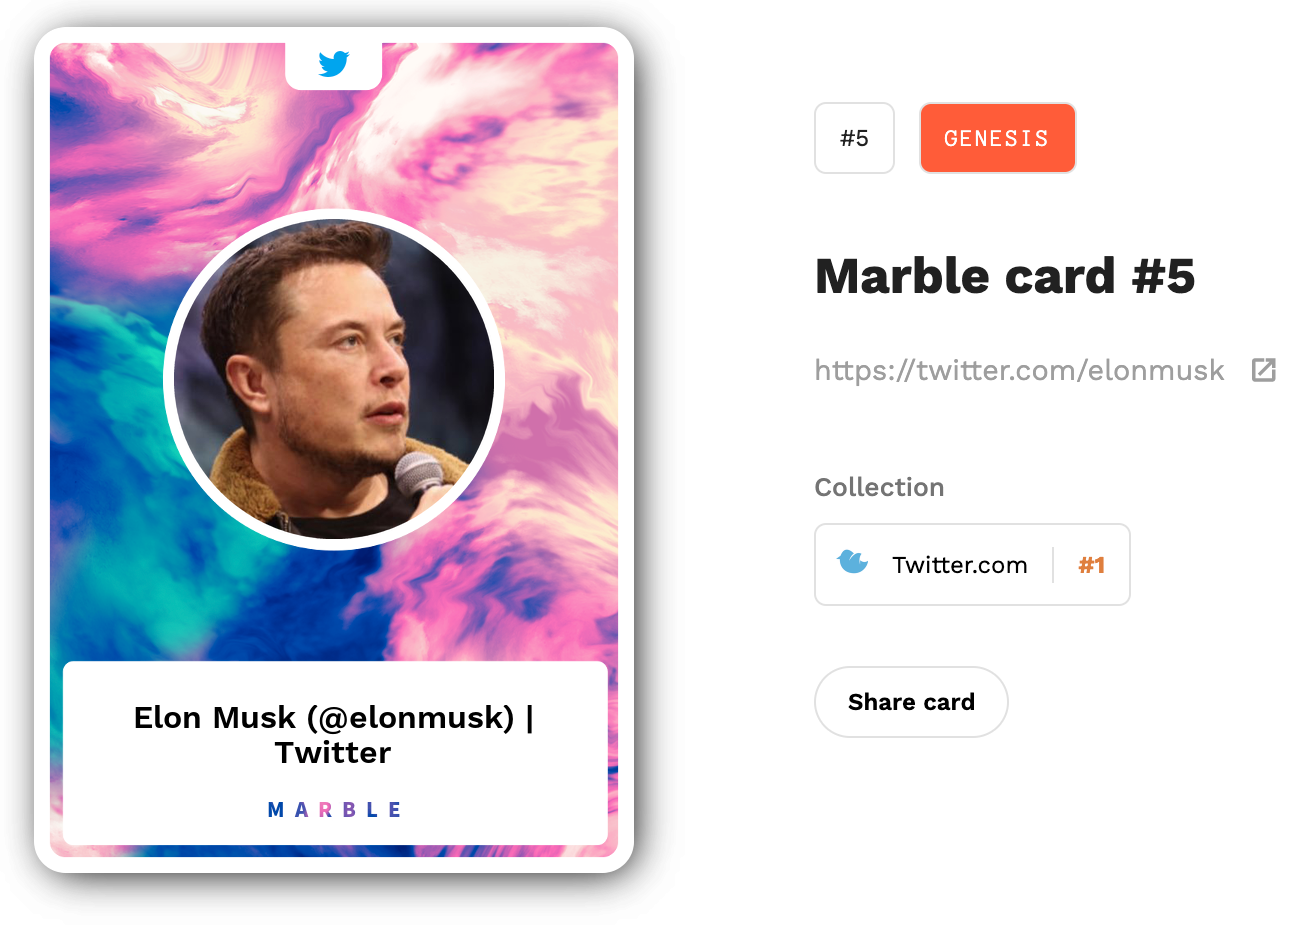 Will you get Elon Musk to sign your Marble Card?